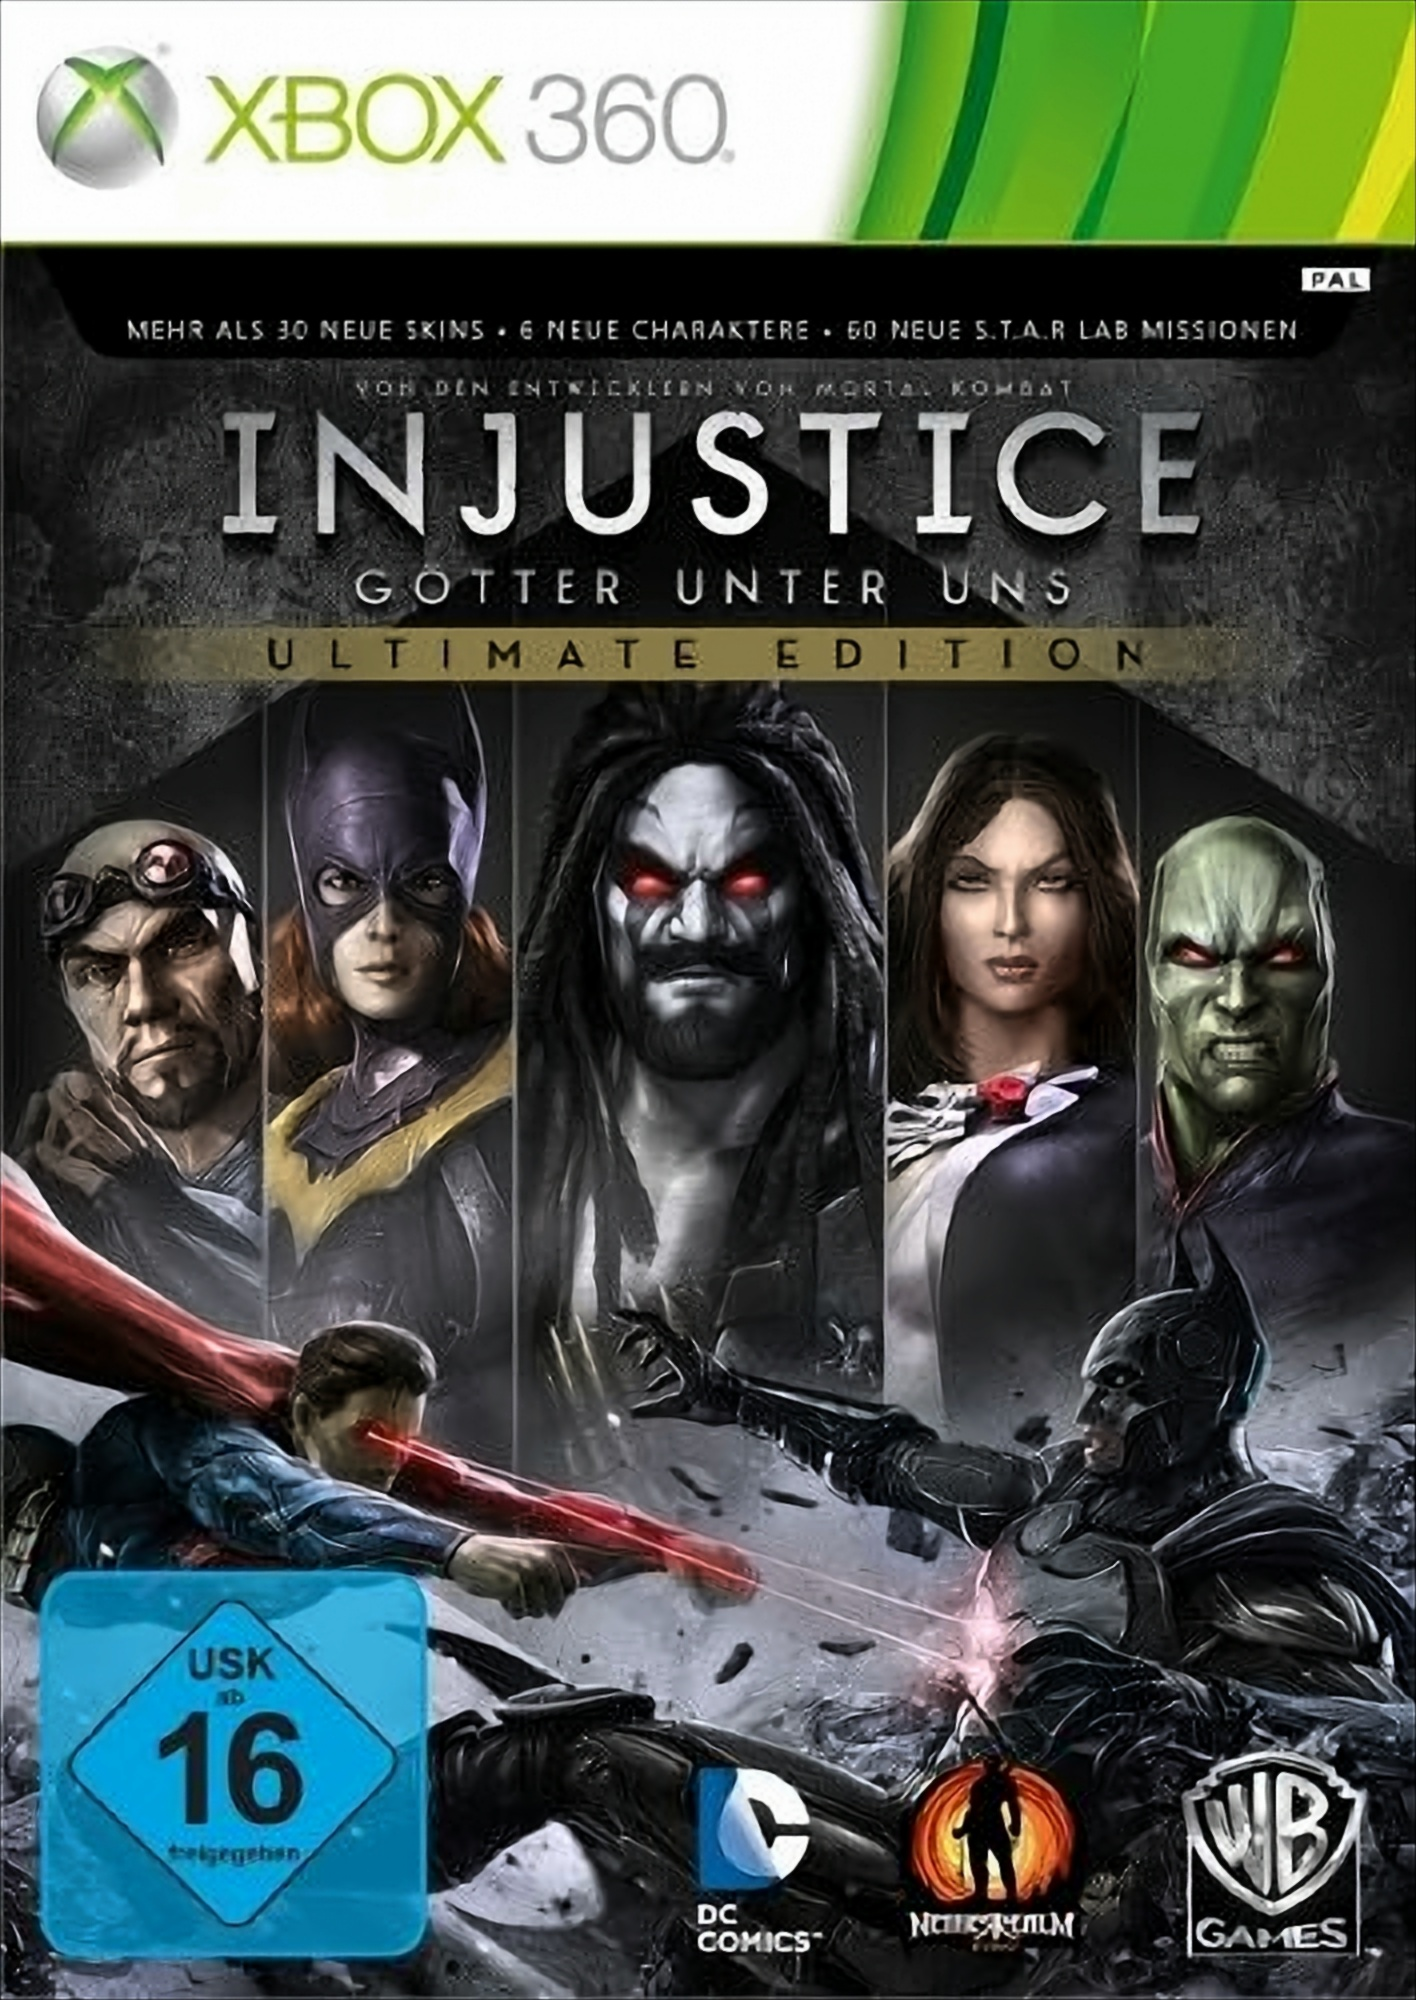 360] unter Ultimate - [Xbox uns - Injustice: Götter Edition